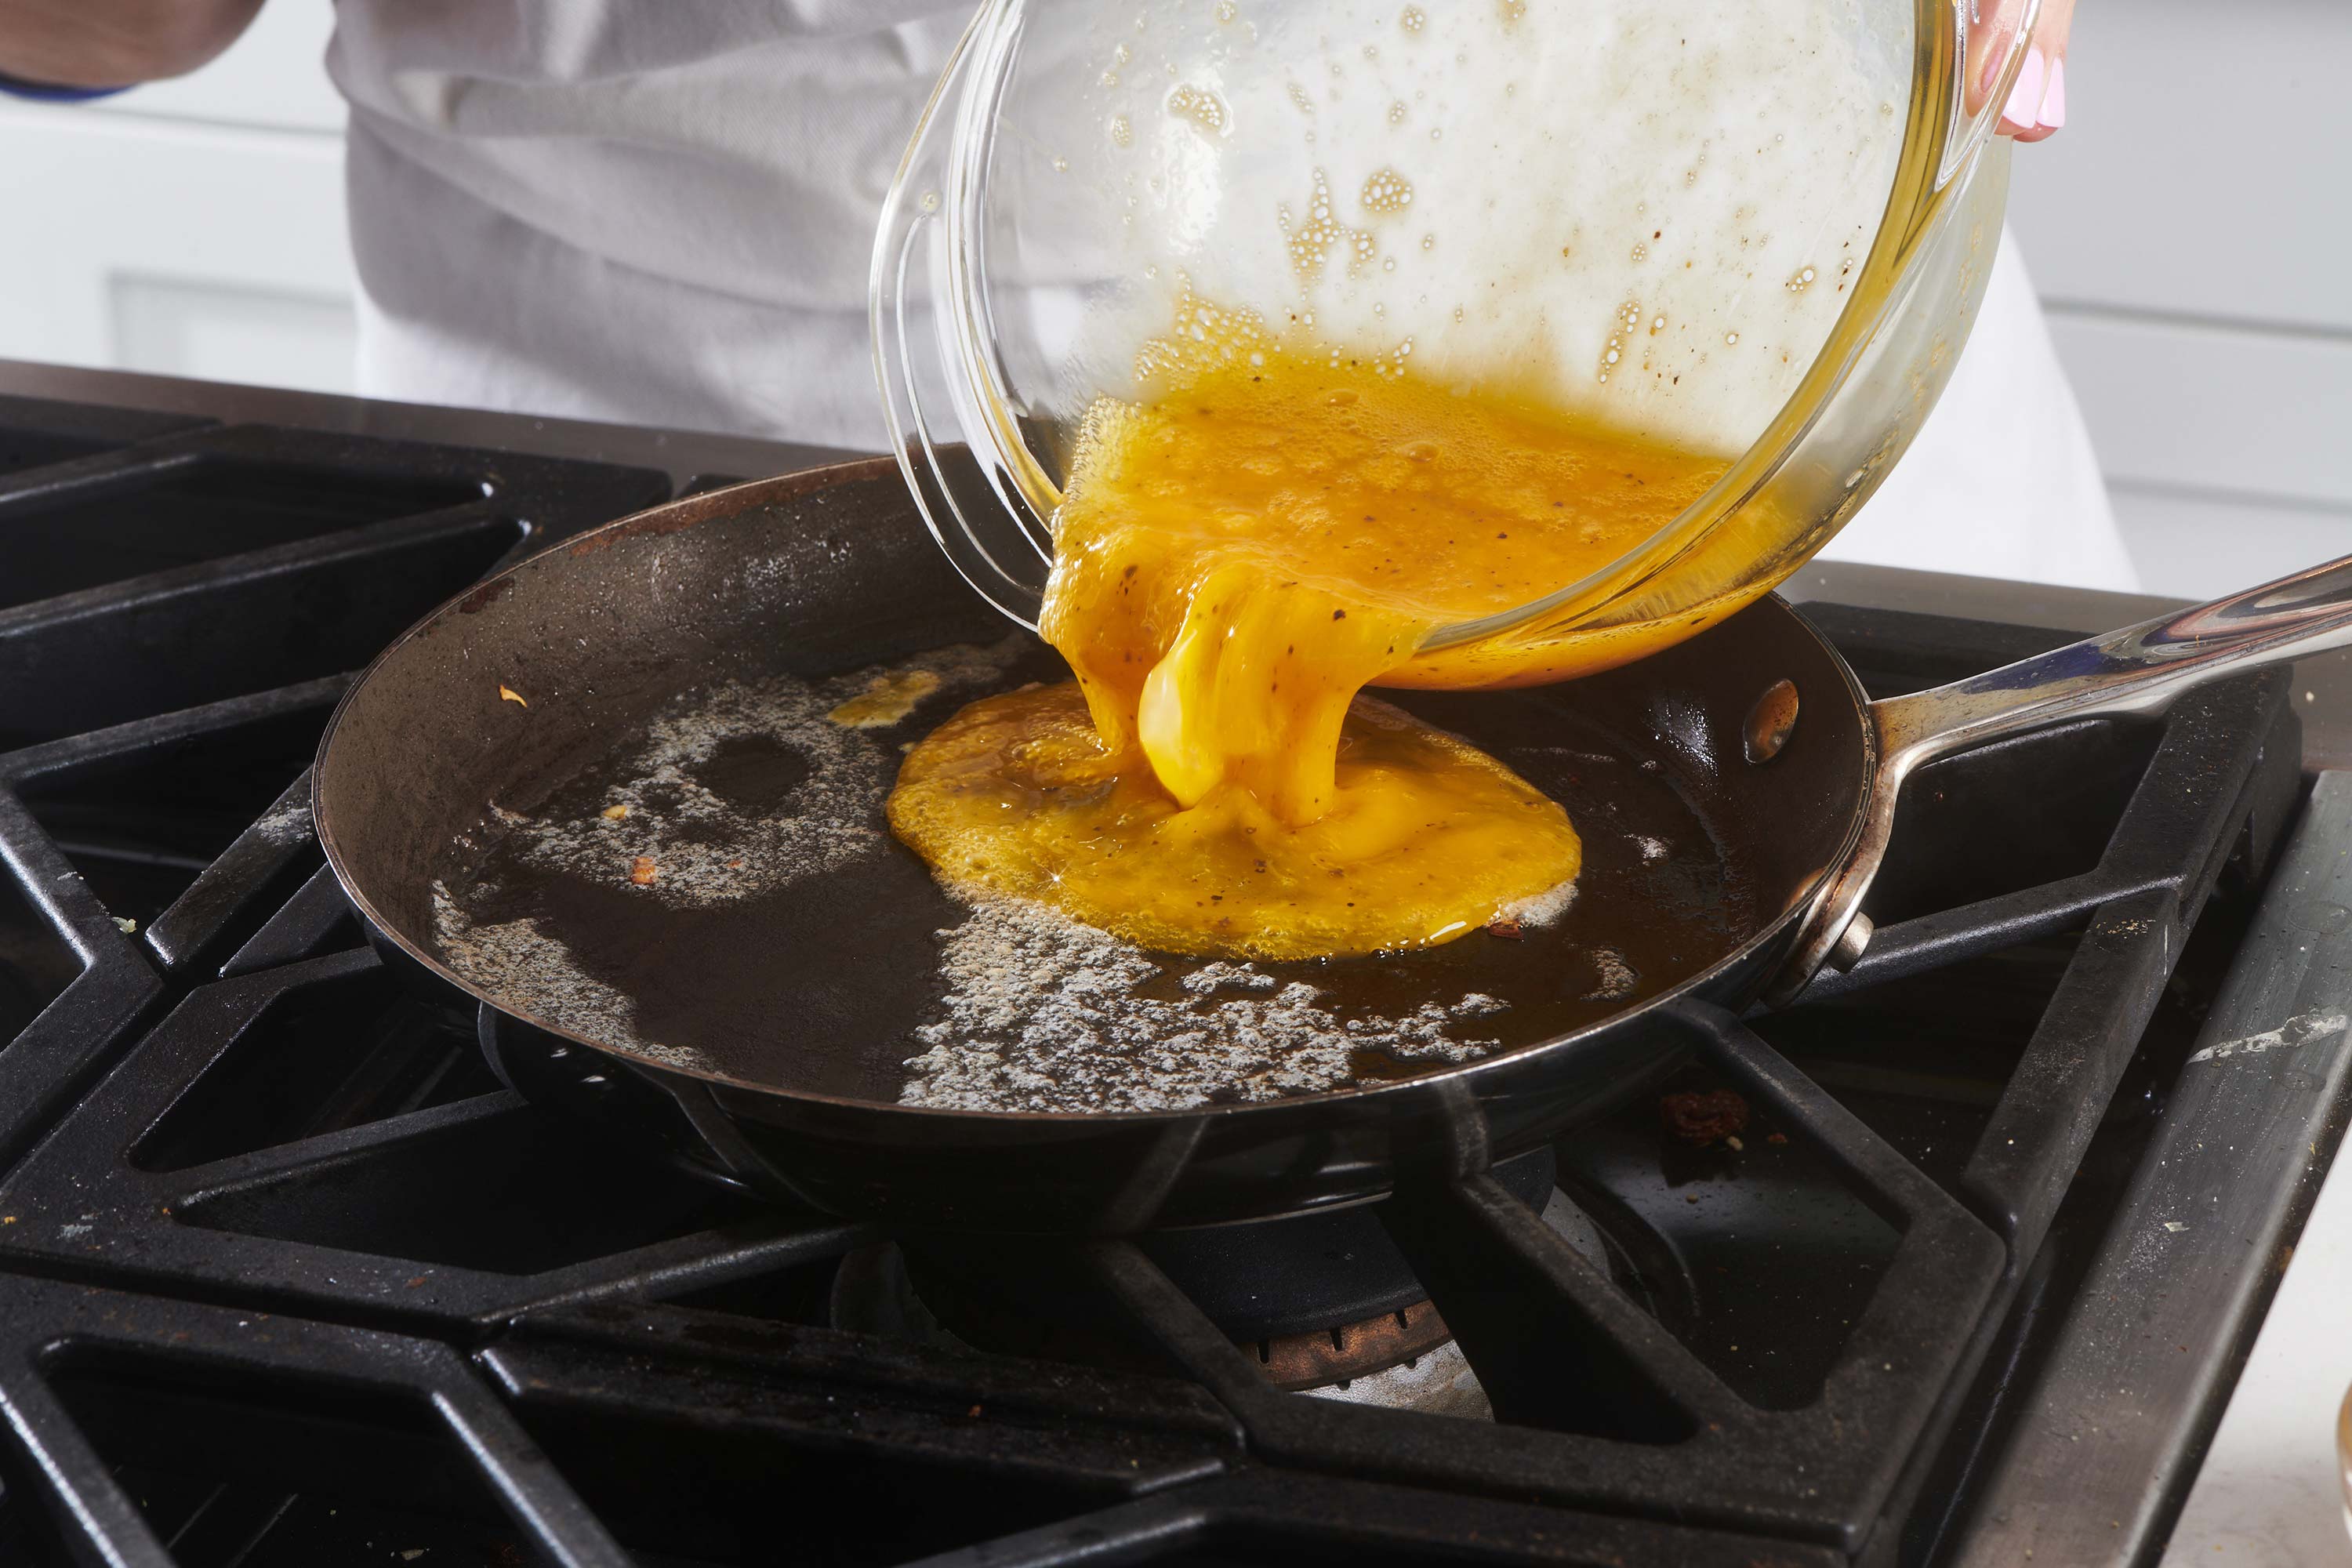 Beaten egg mixture pouring into a skillet.